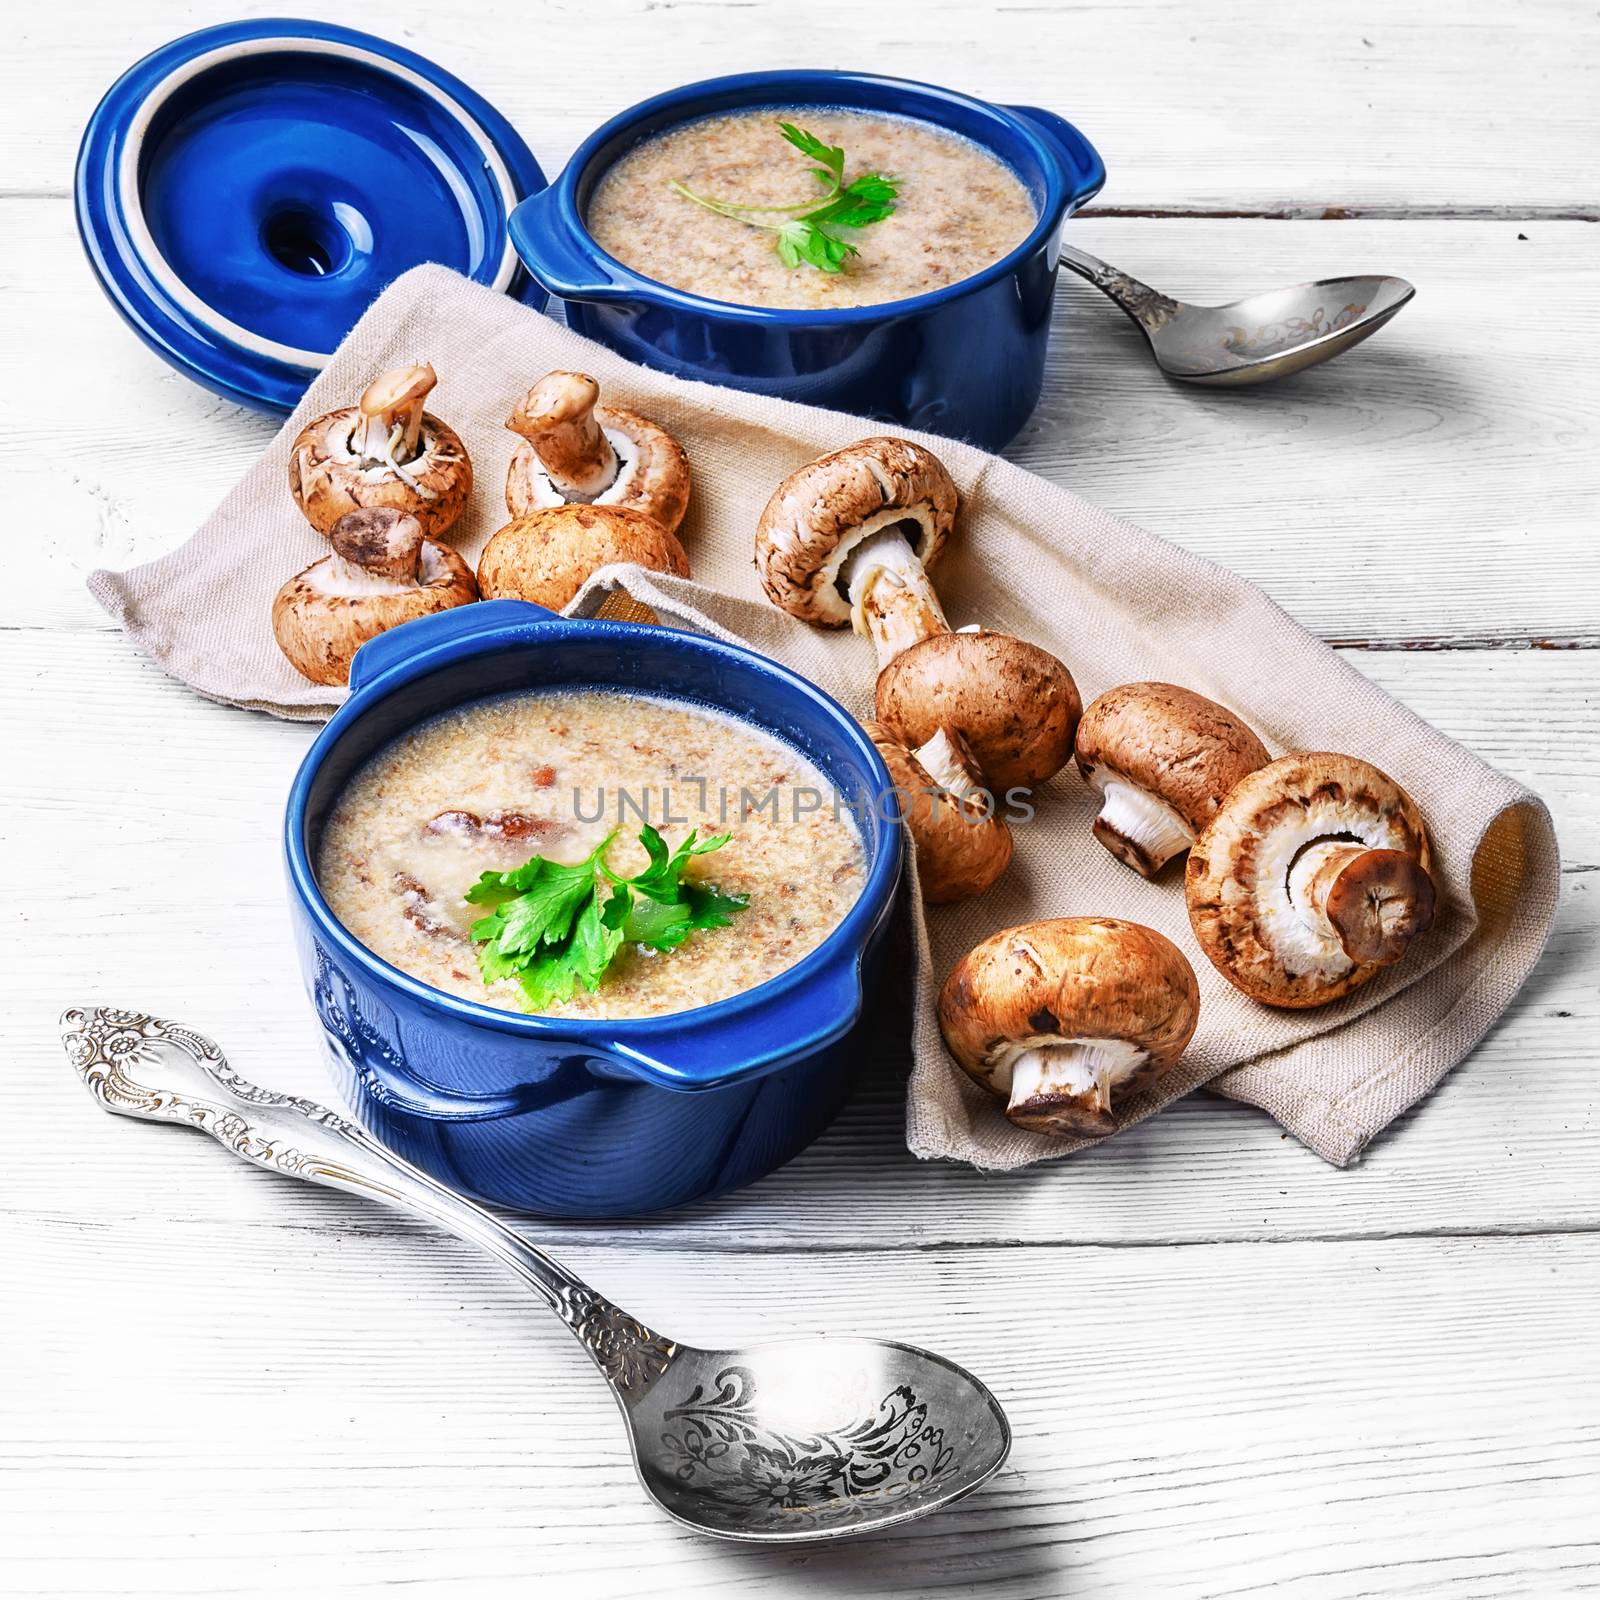 puree soup with mushrooms by LMykola